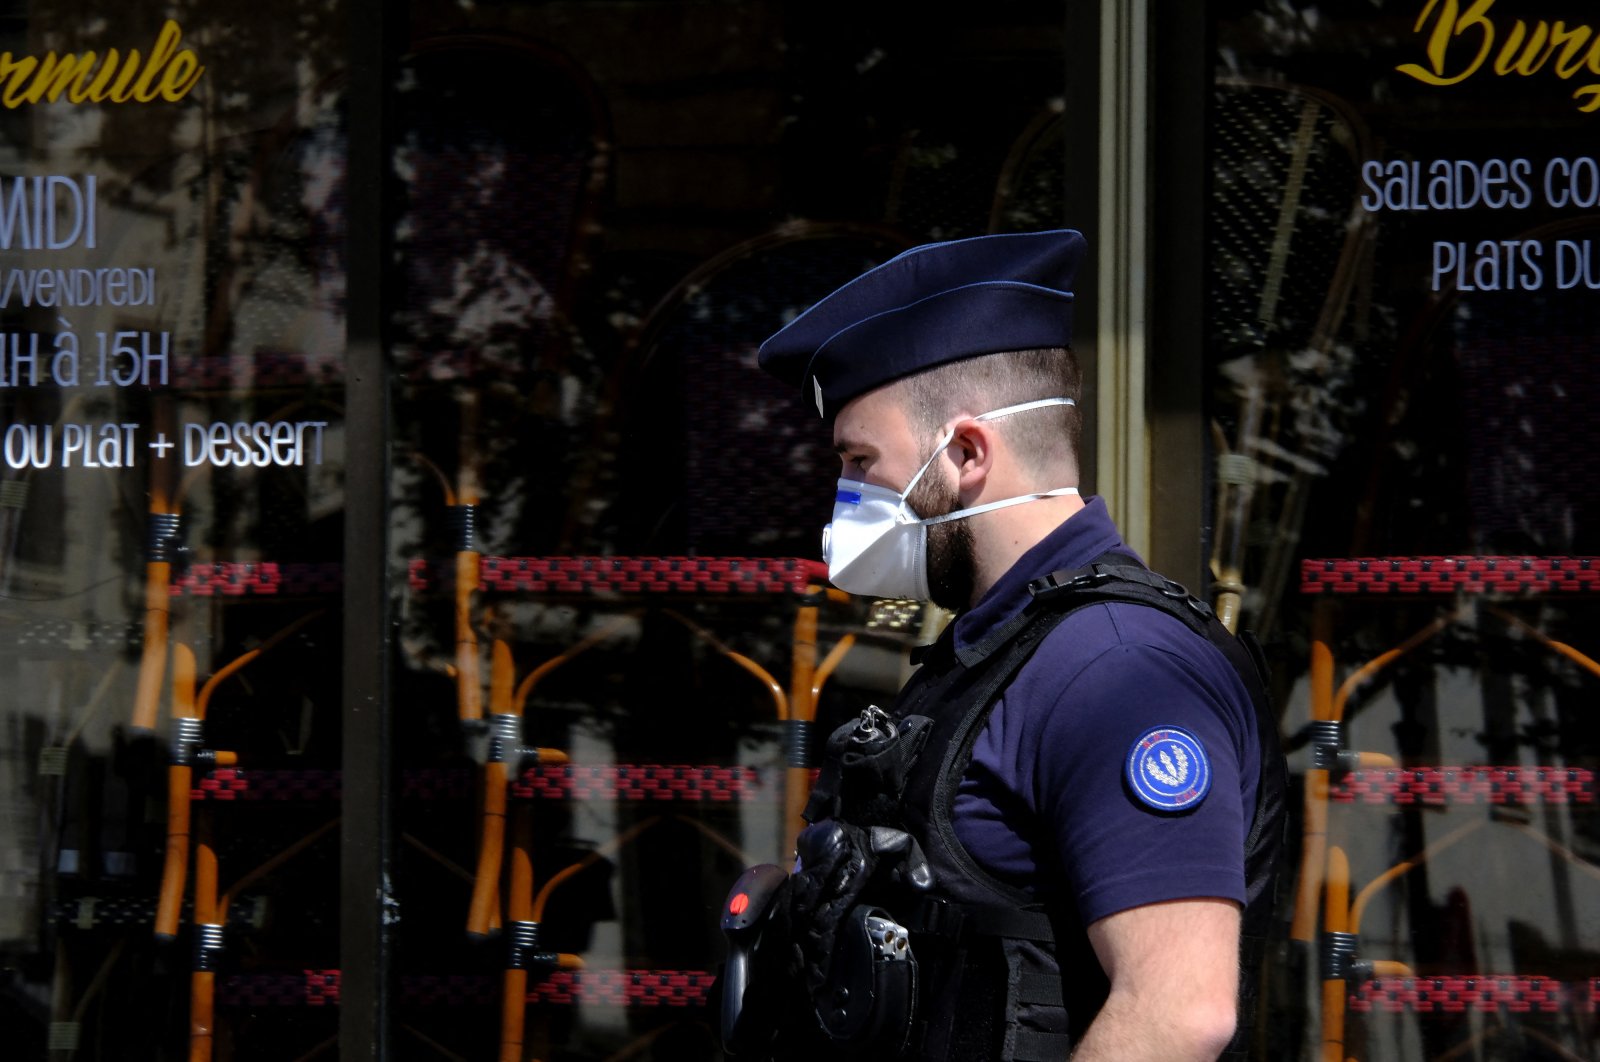 A French police officer wearing a protective face mask against the coronavirus walks in Paris, France, April 22, 2020. (Photo by Alfred Yaghobzadeh/acabapress.com via Reuters)